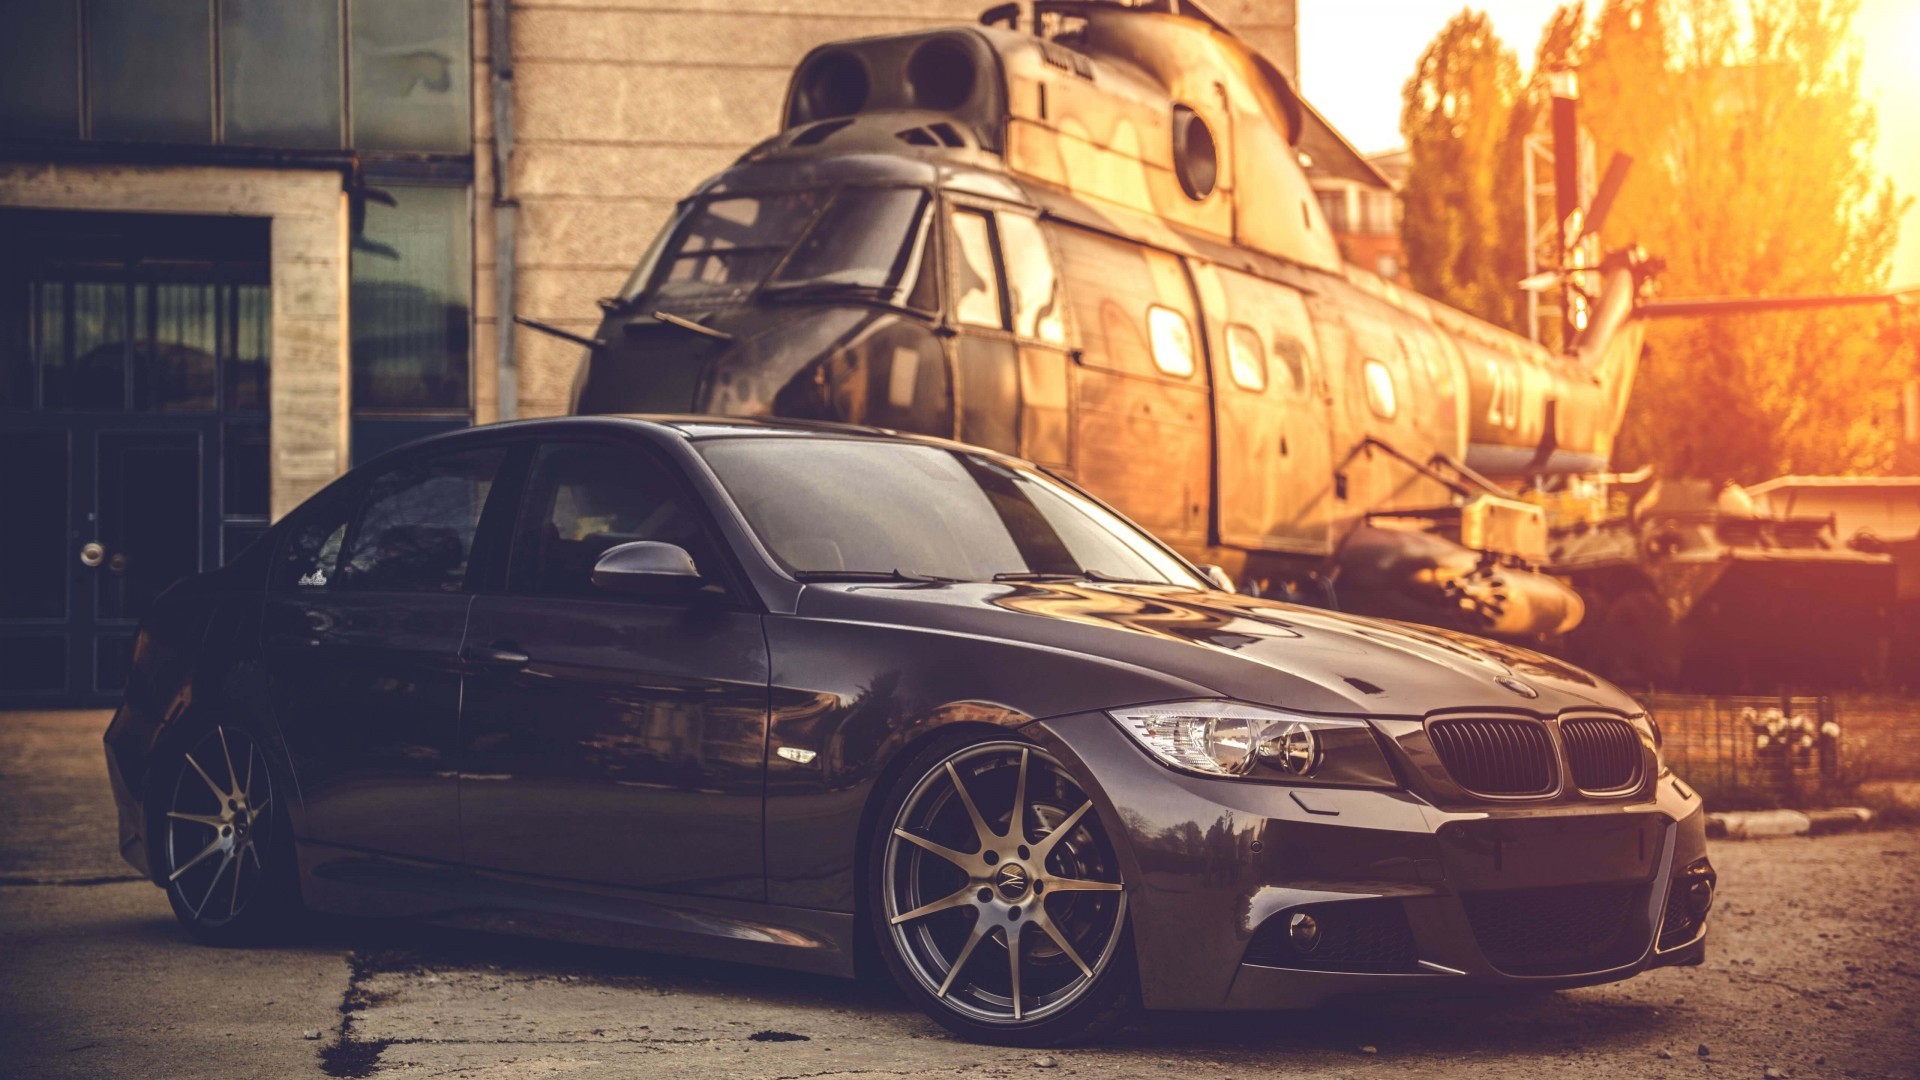 BMW E90, Helicopters, Sunlight Wallpaper